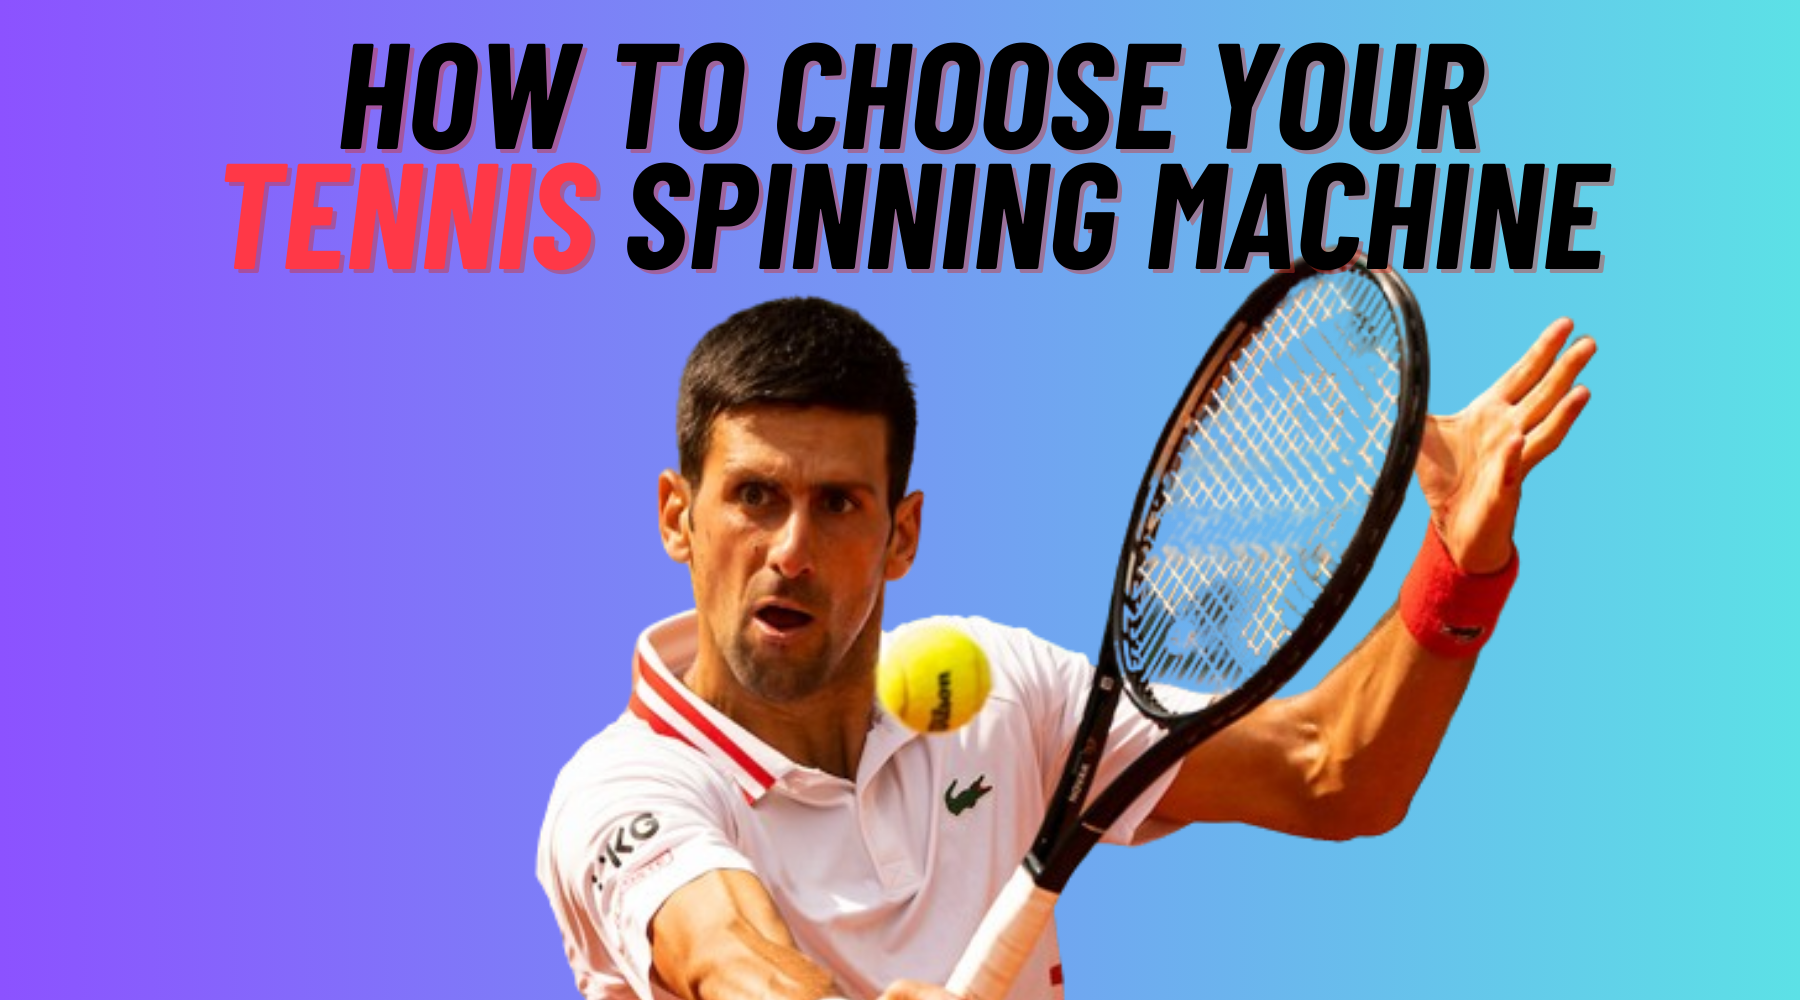 How to Choose Your Tennis Spinning Machine